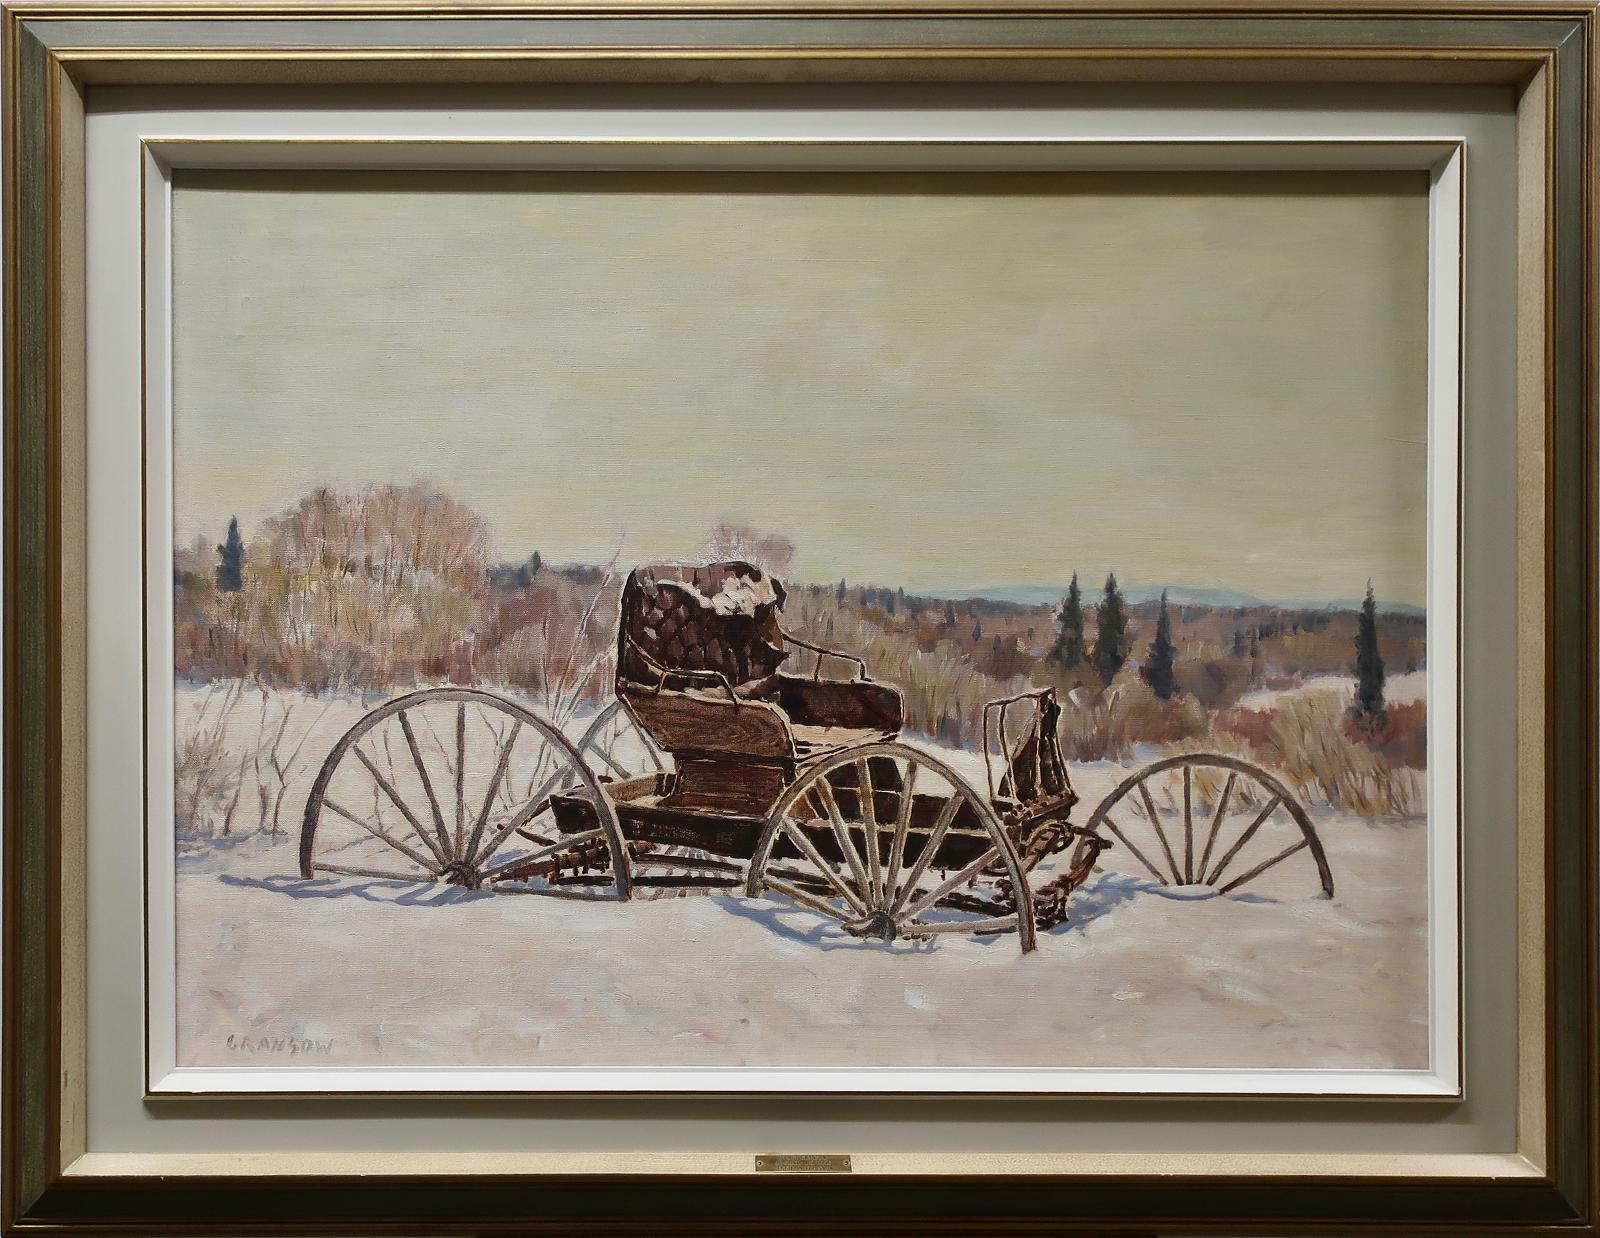 Helmut Gransow (1921-2012) - Carriage In Snow